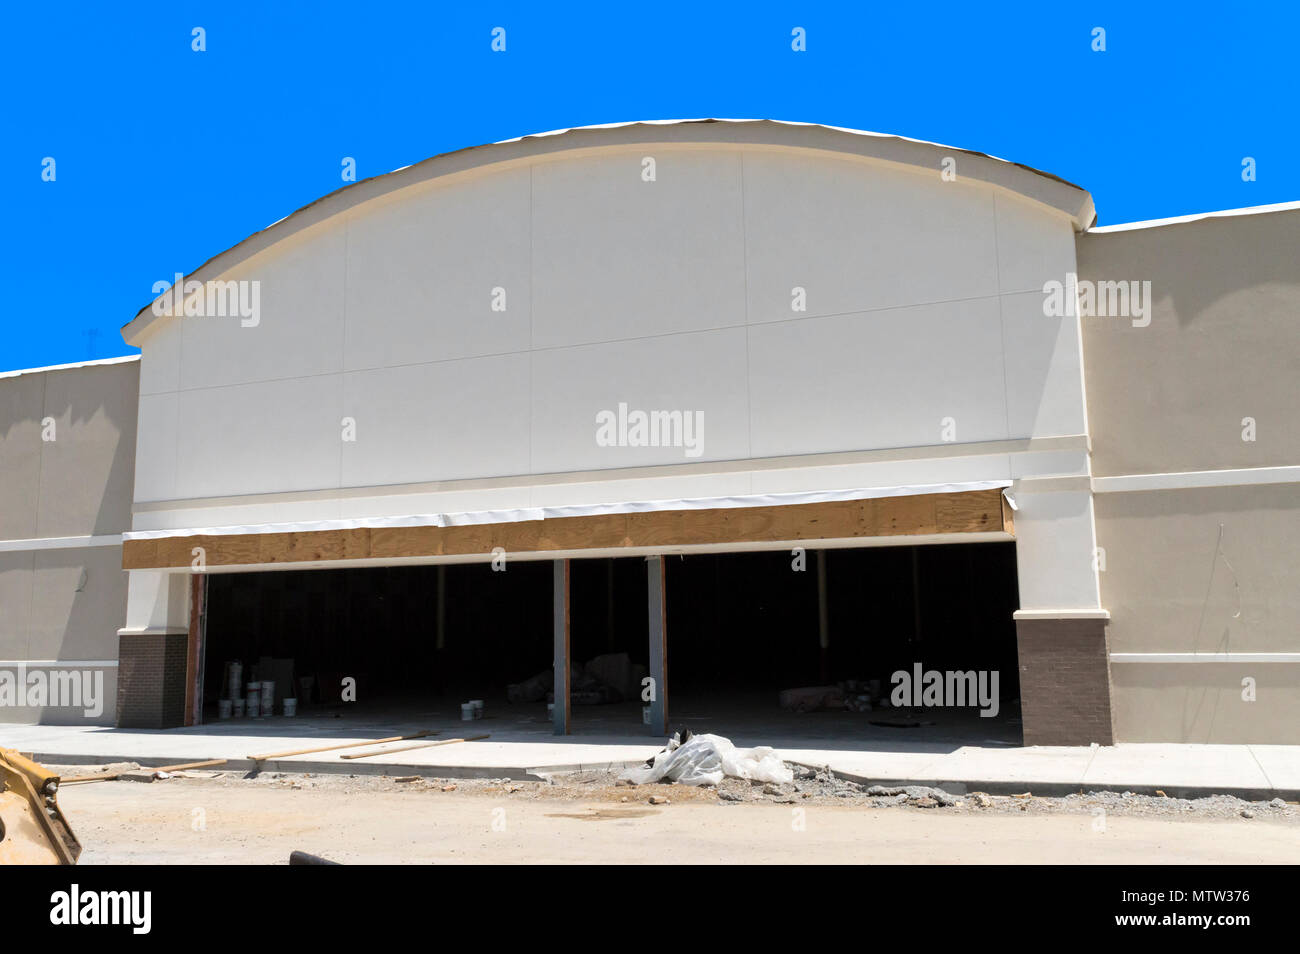 A new blank store front face being built. Stock Photo